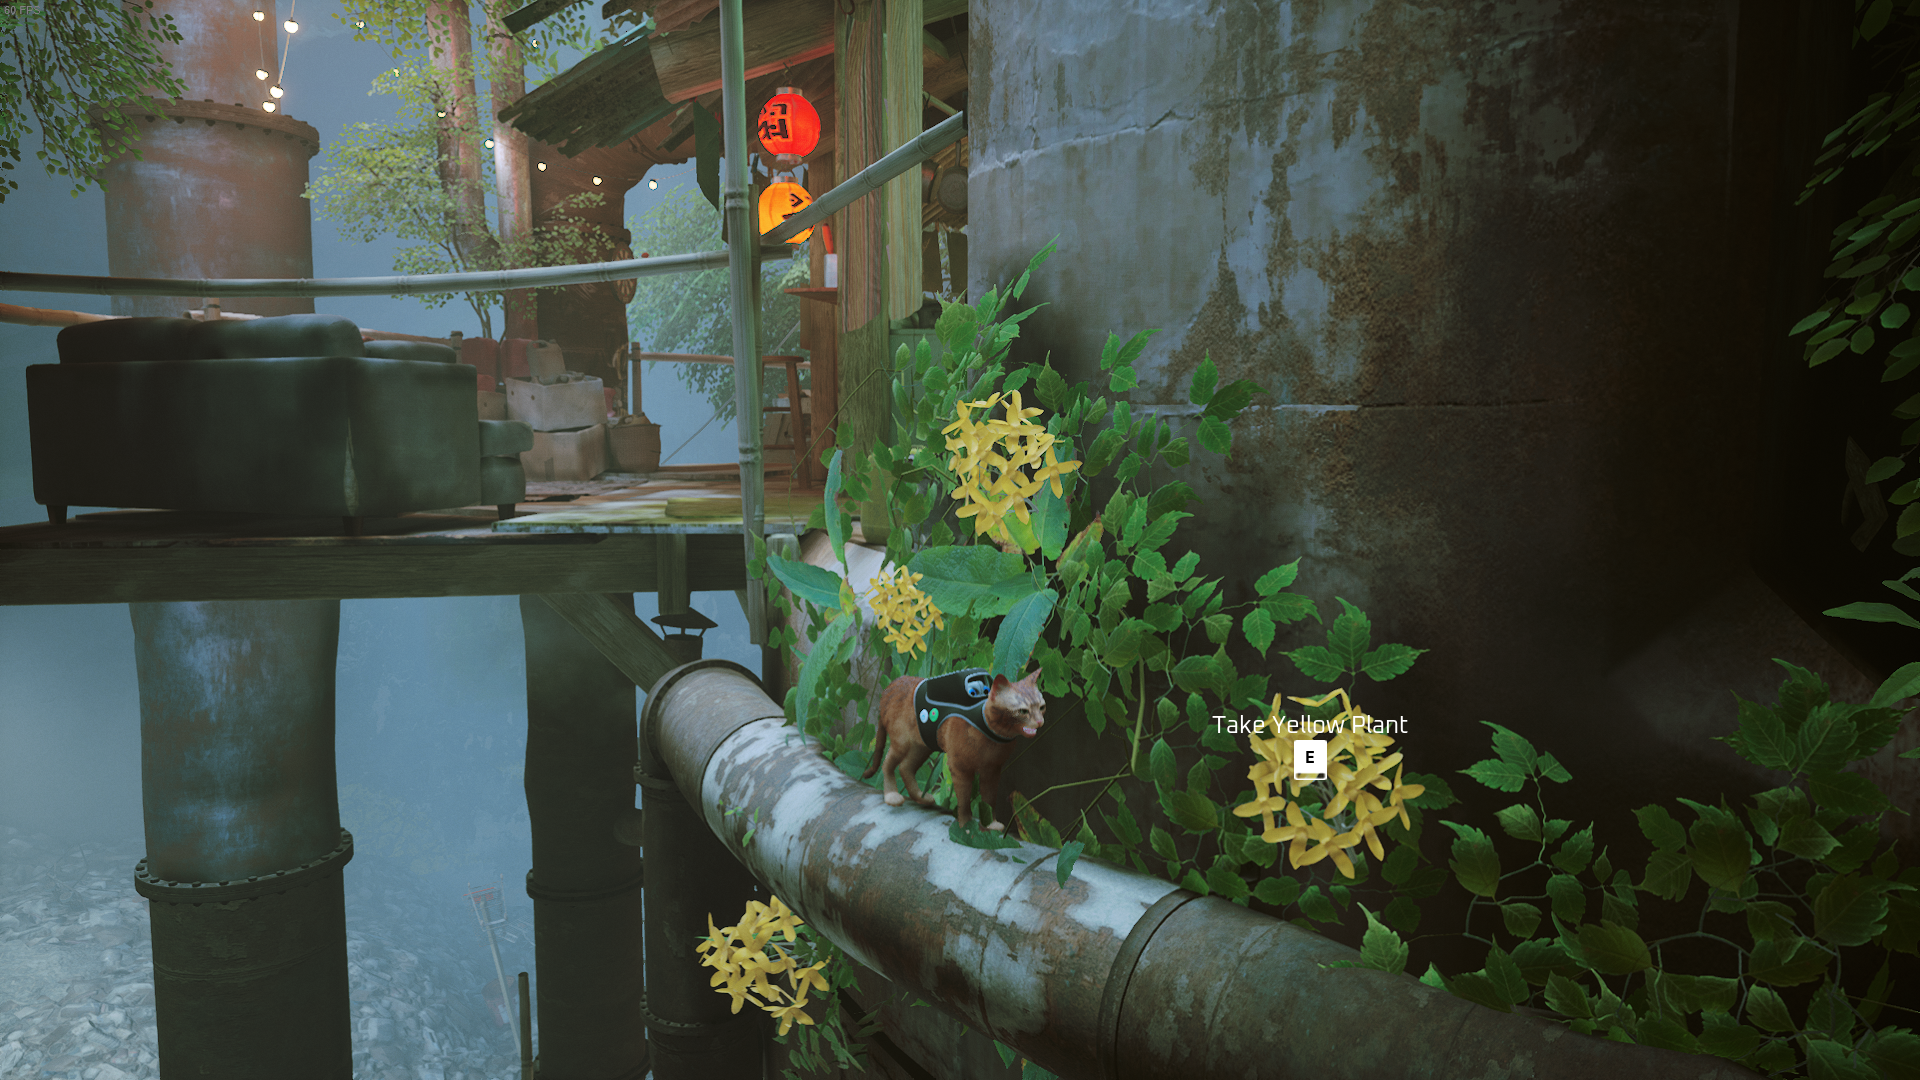 The cat of Stray climbs a pipe to collect a yellow flower in Antvillage.